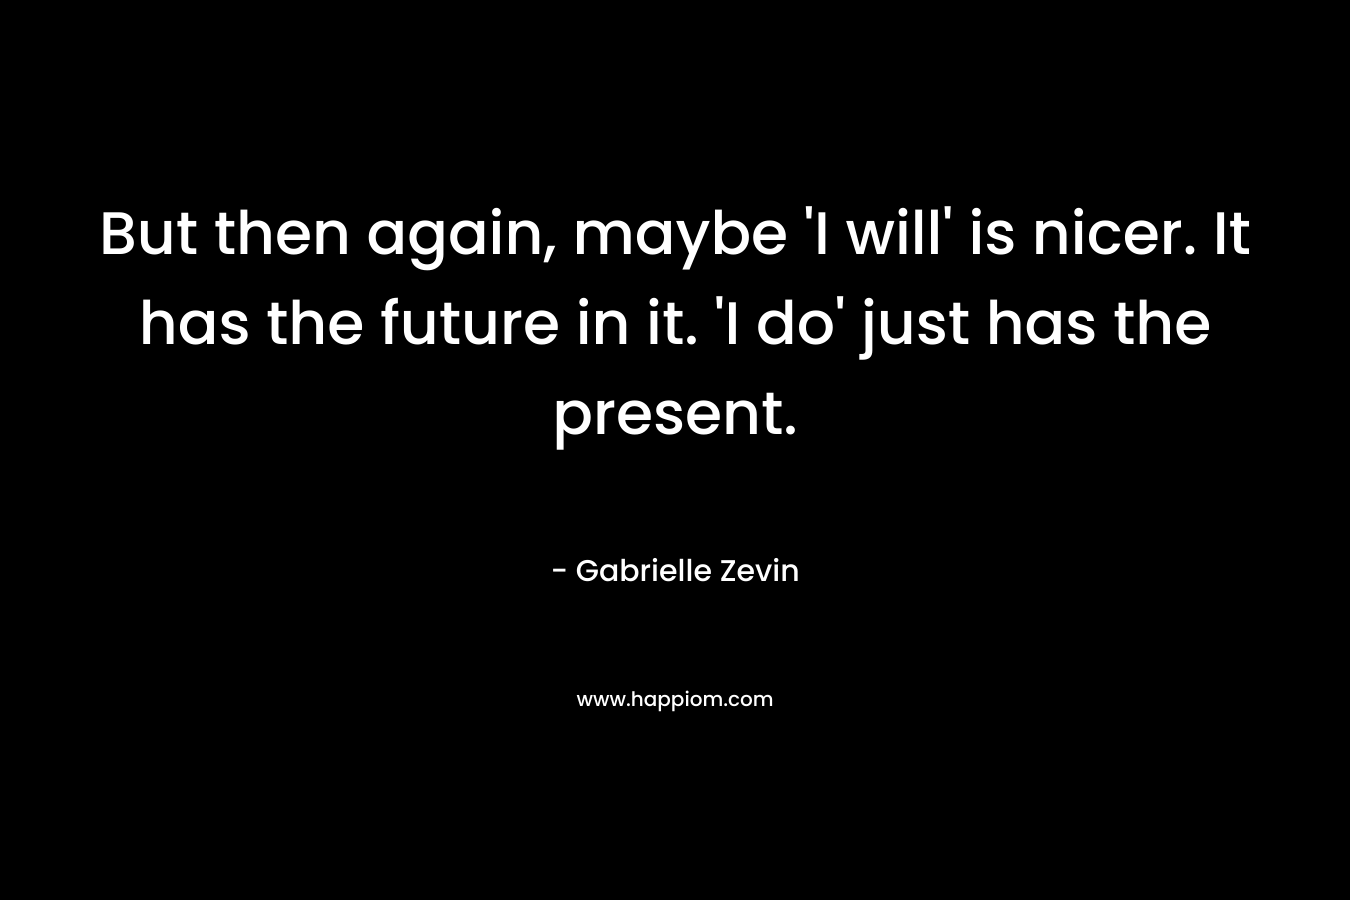 But then again, maybe ‘I will’ is nicer. It has the future in it. ‘I do’ just has the present. – Gabrielle Zevin